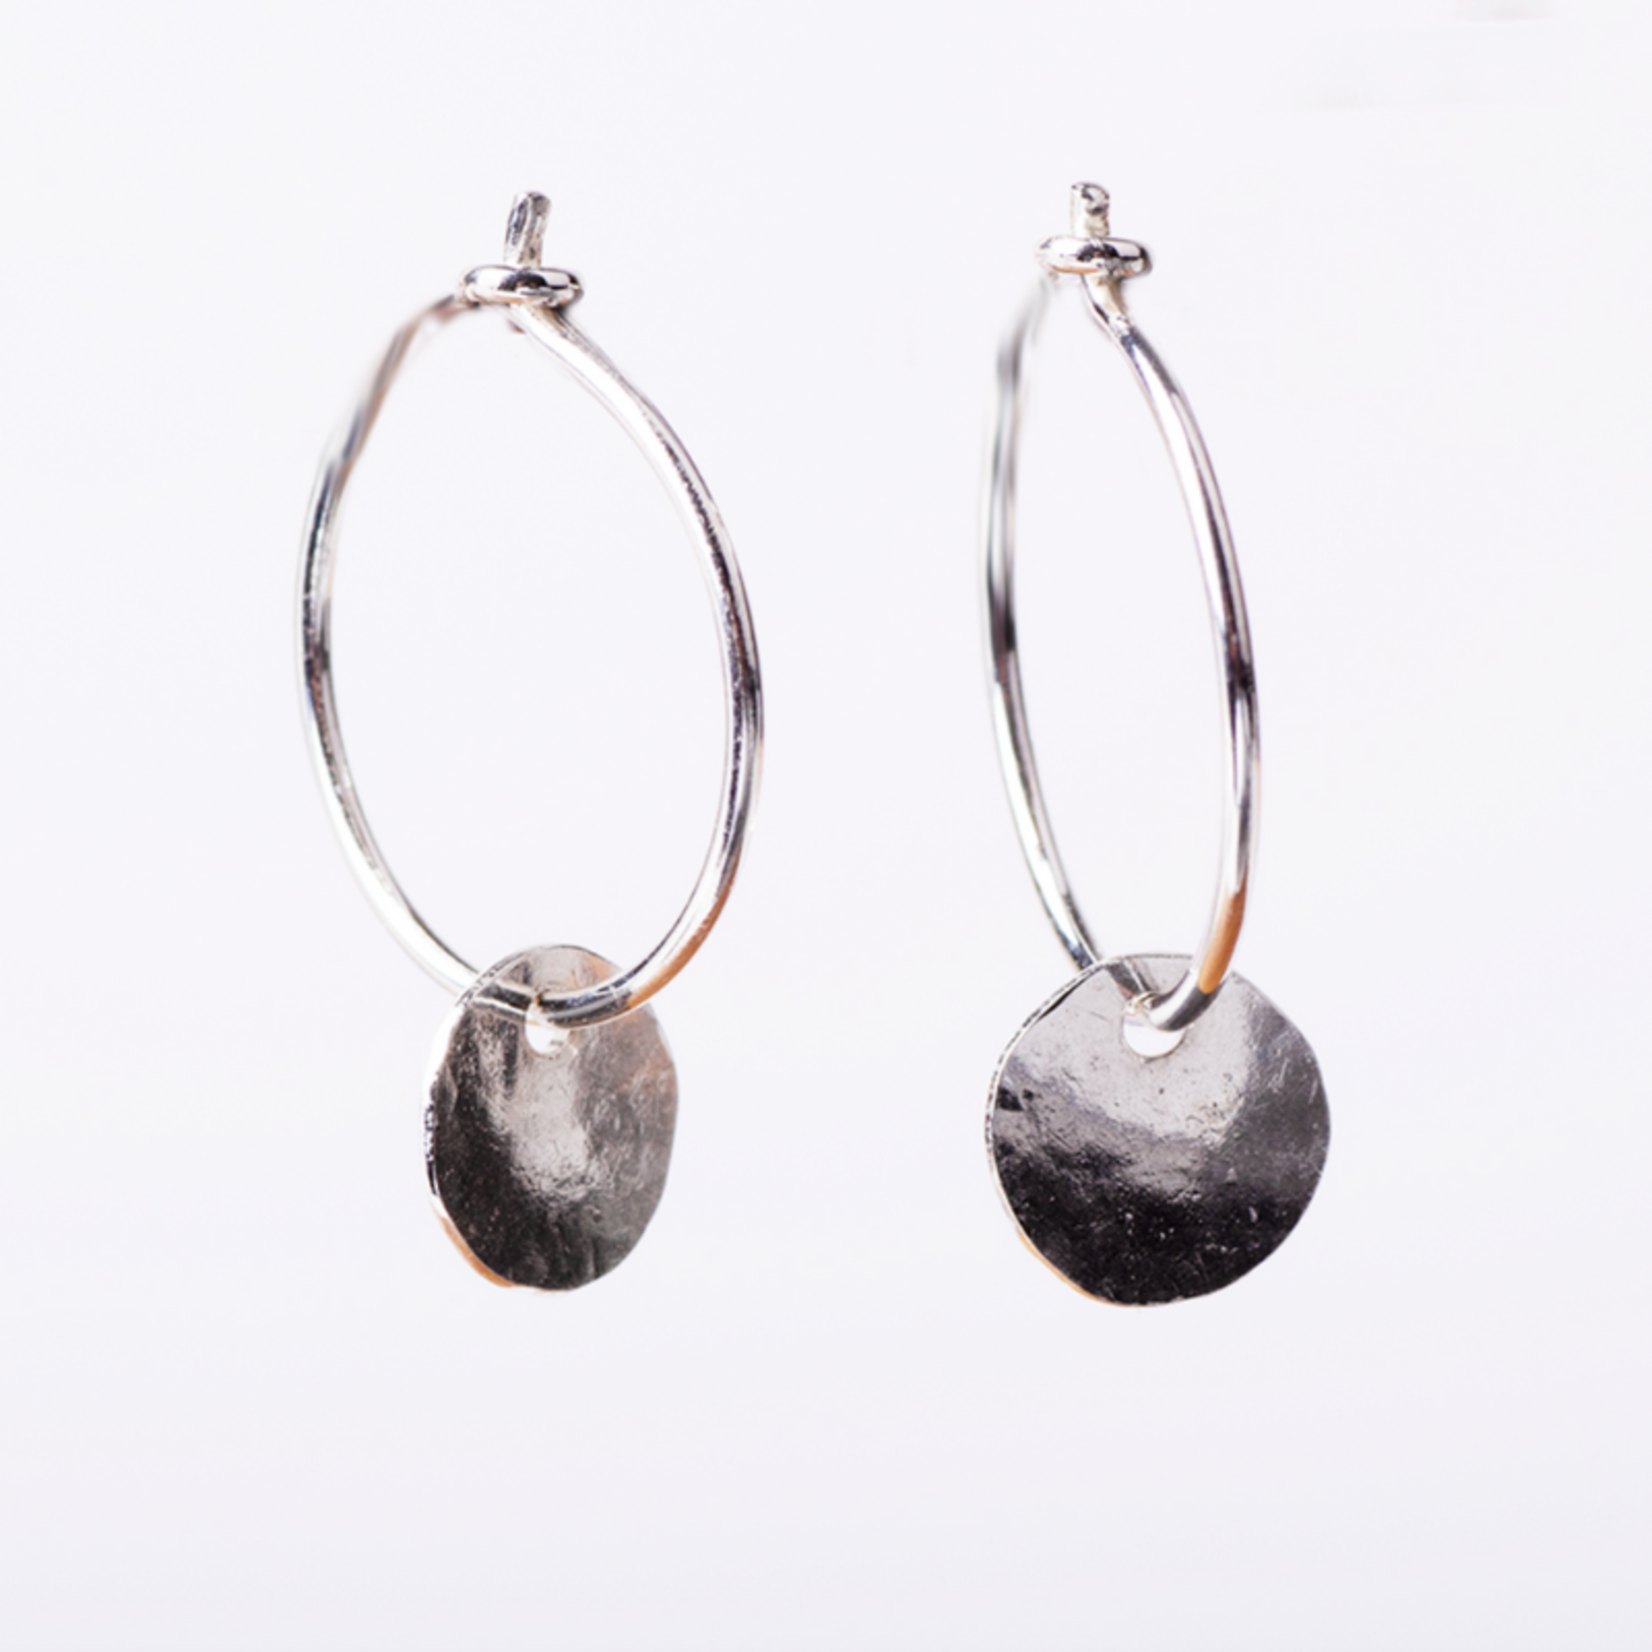 charlotte wooning charlotte wooning - earrings bubbles hoop small